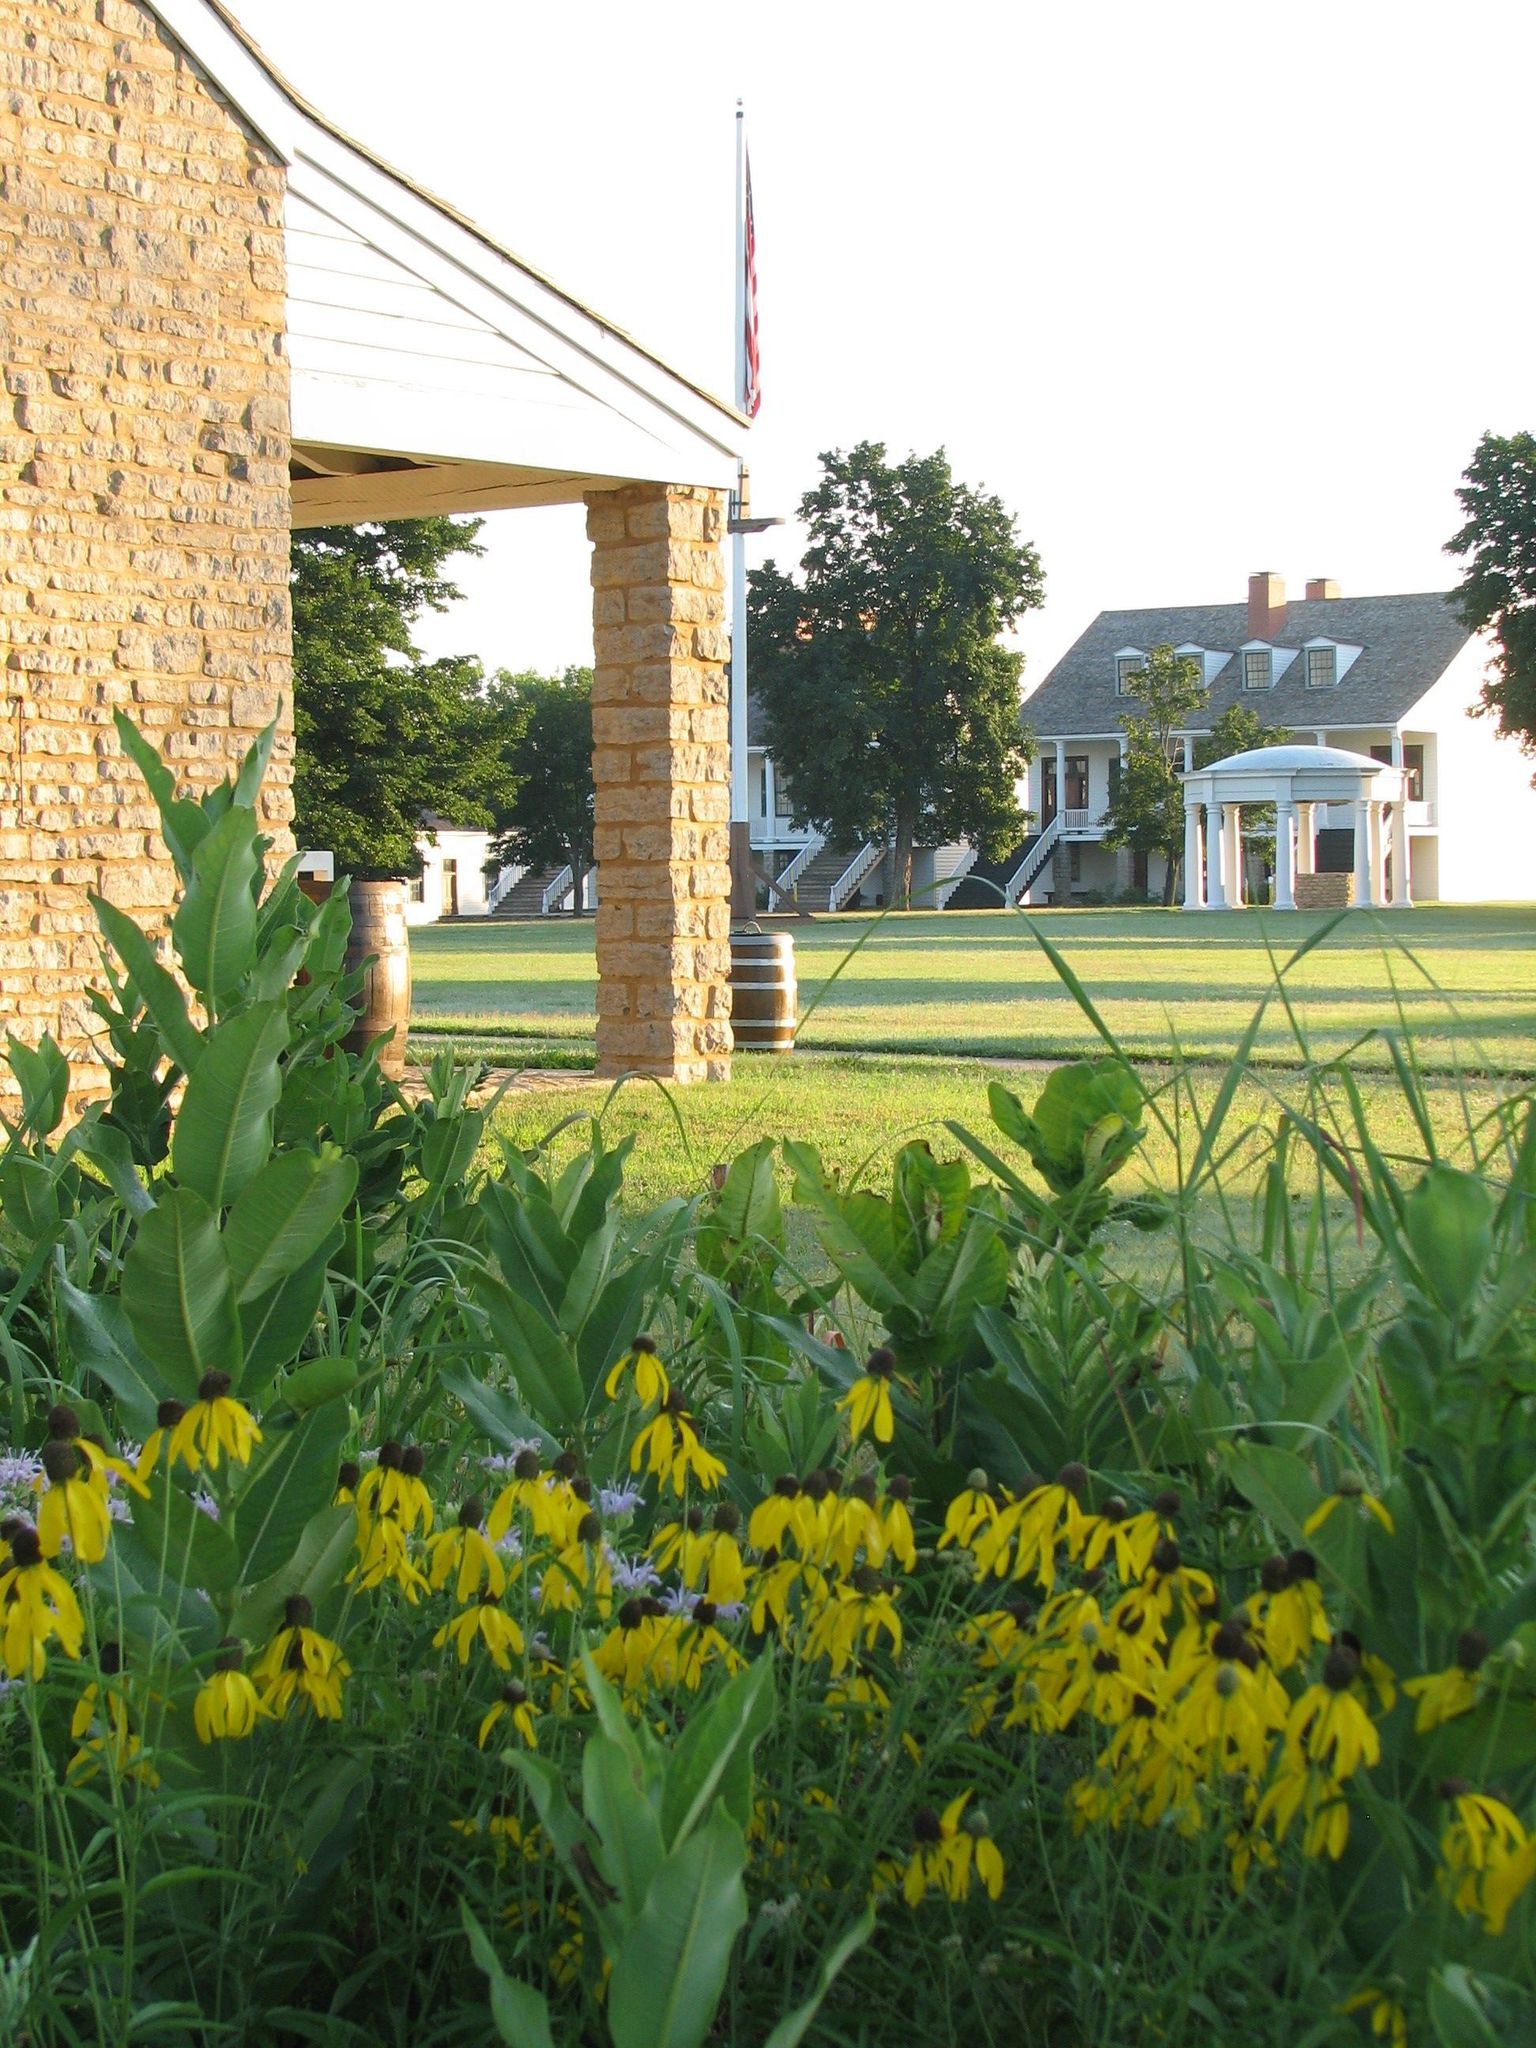 A field of sunflowers adds a splash of color to a view of the parade ground at Fort Scott.